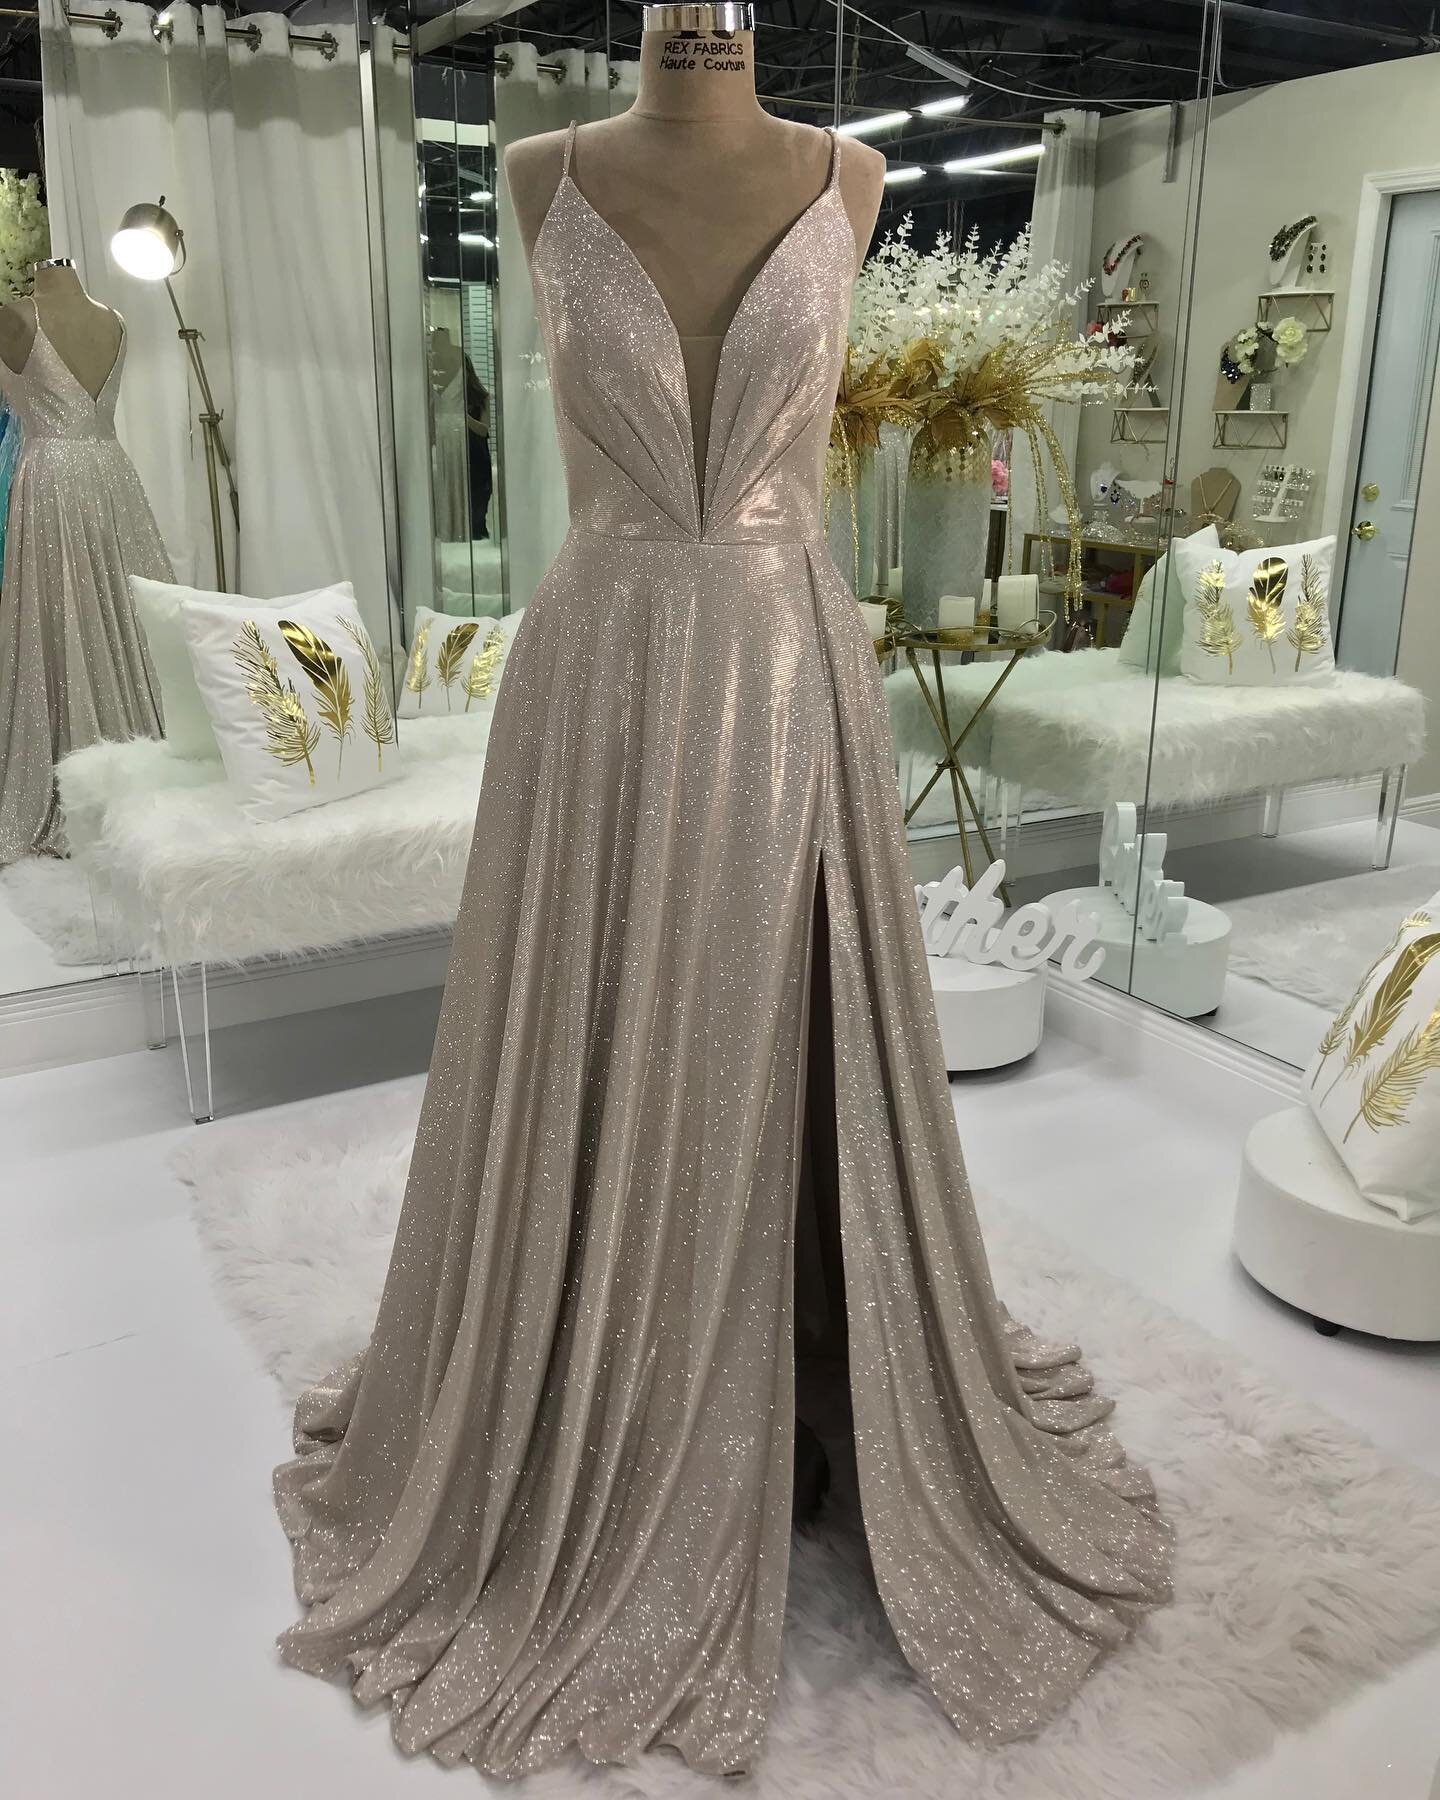 beautiful low cut gown with pockets !!!
&bull;
&bull;
&bull;
&bull;

#quince#quinceañeramiami #quinceañera #quincedress #miami#miamidresses #miamidressrental#southflorida #dresses #gowns #dressrental #quinceañeras #quinceaños #quinceañeraphotogr